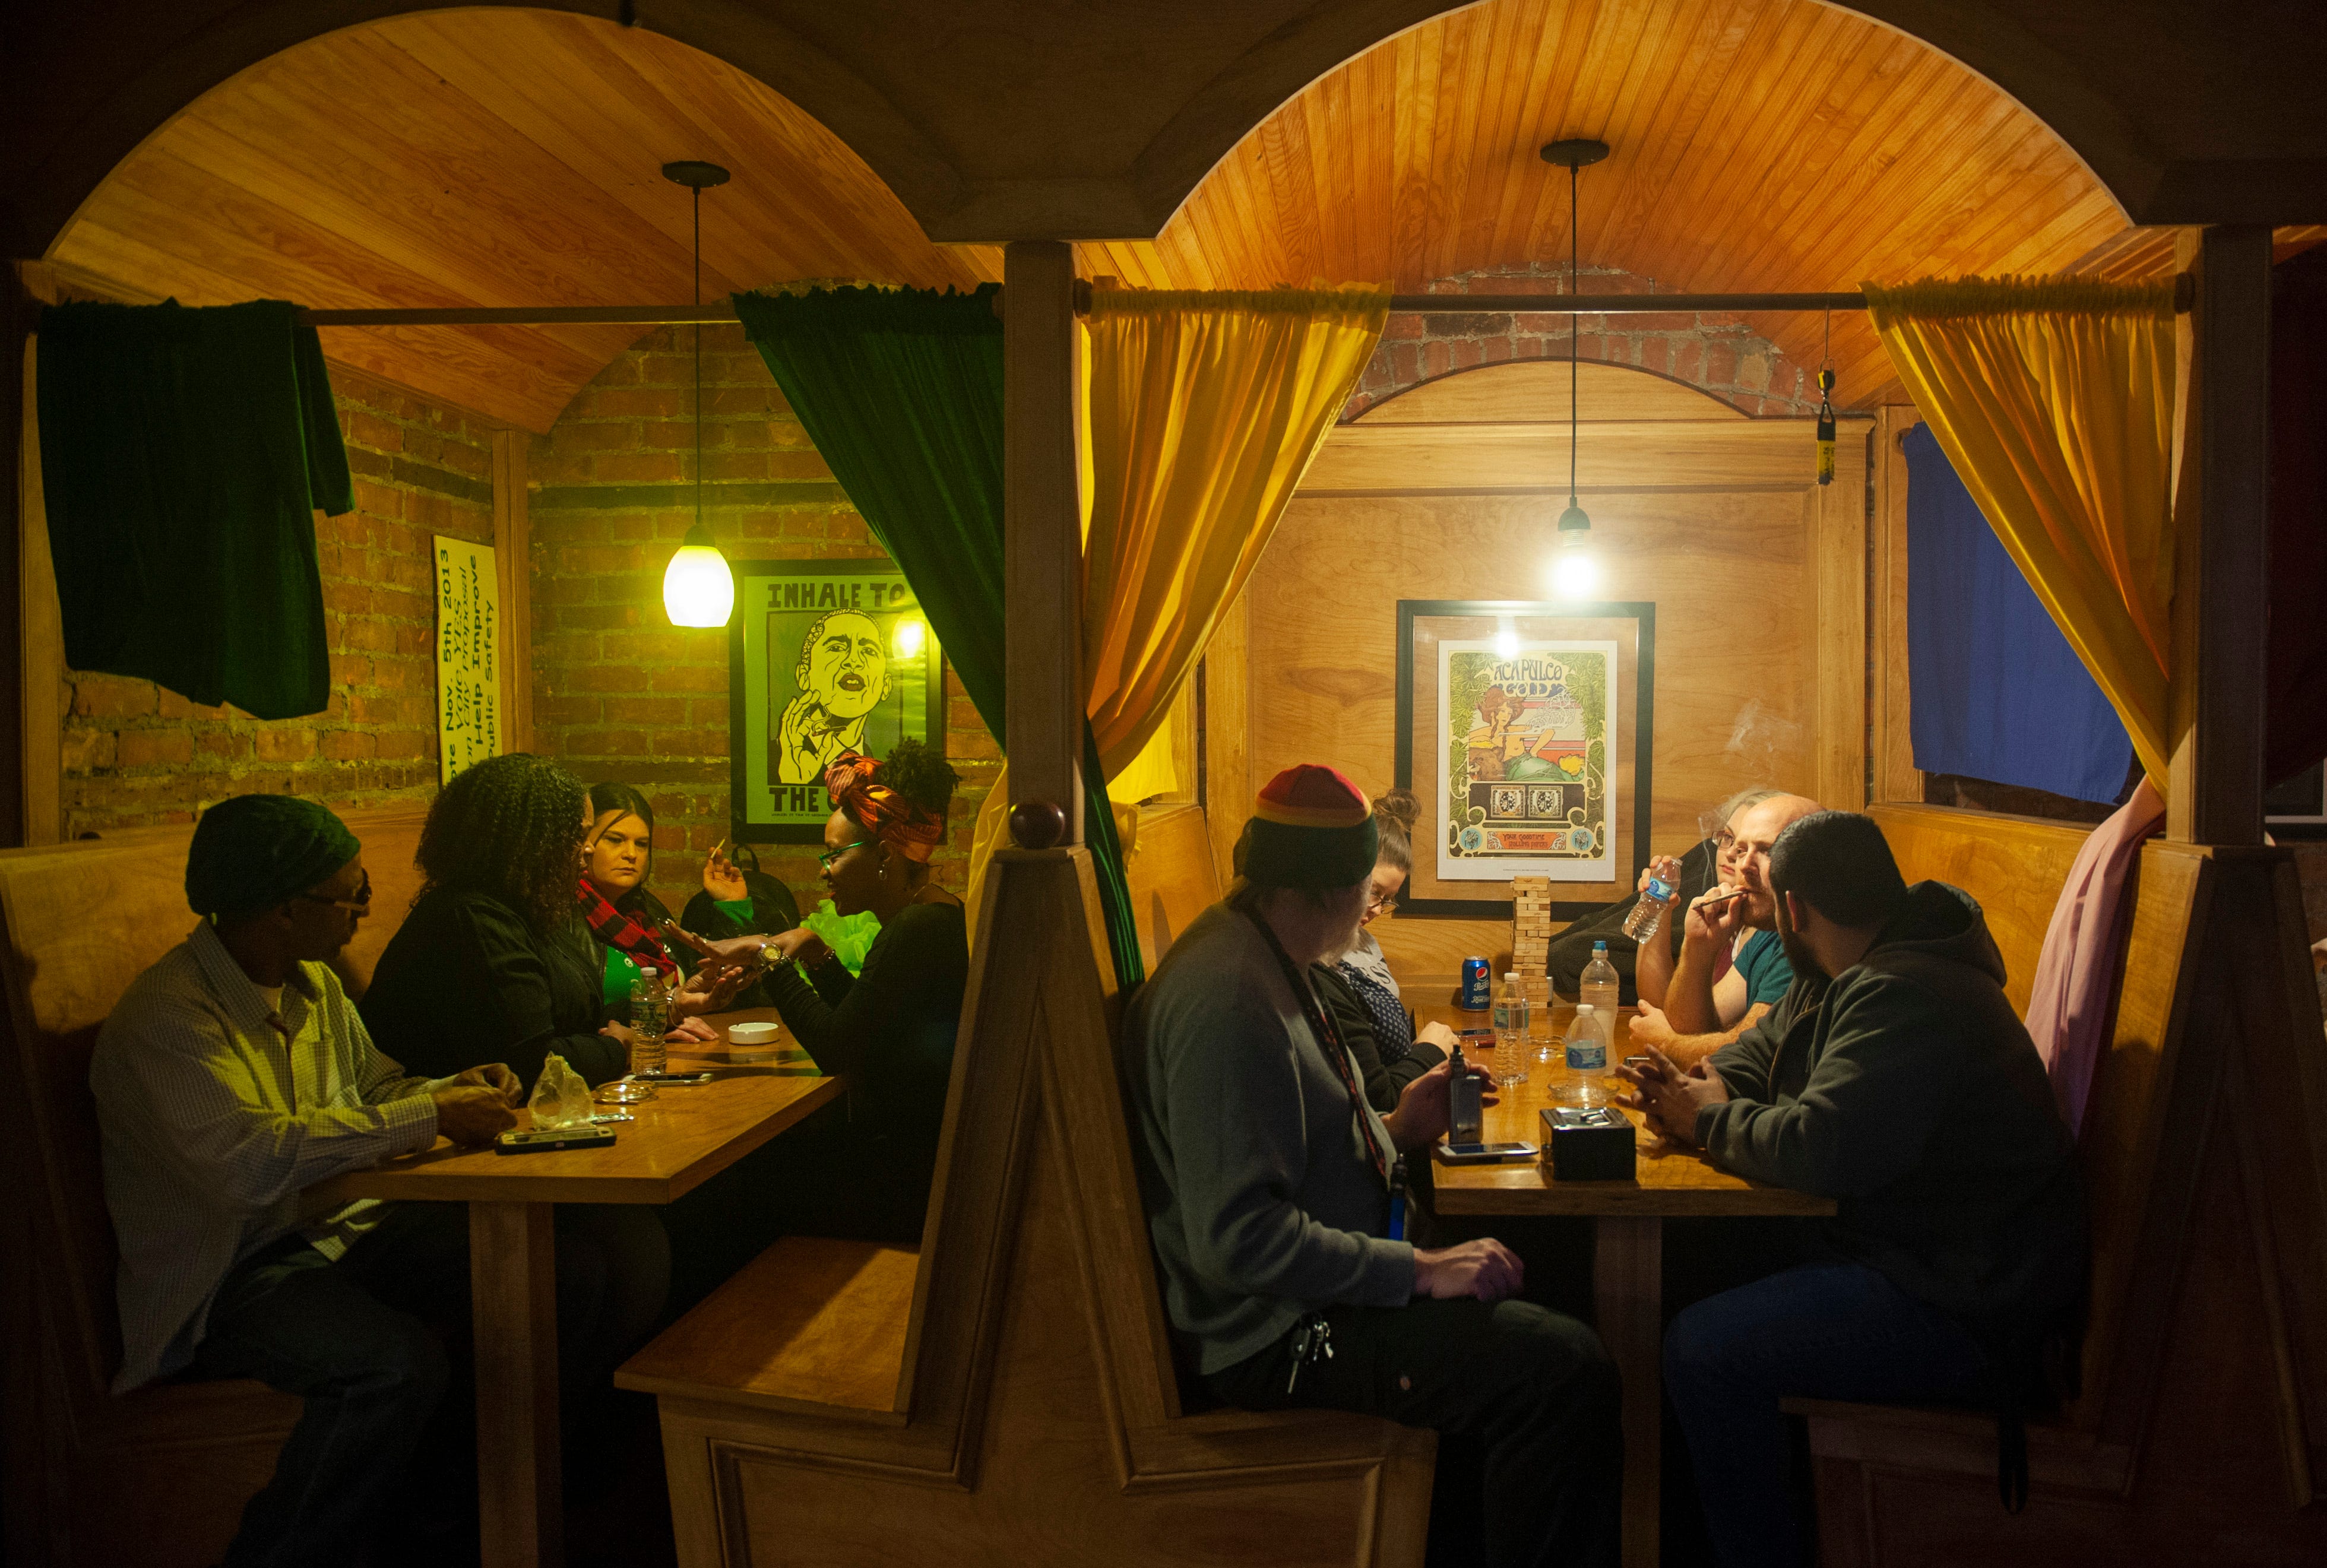 Guests at "The Art of Cannabis" event at the Cannabis Counsel in Detroit hang out in restaurant-style booths smoking marijuana and waiting for the festivities to begin on Saturday, Dec. 22, 2018.